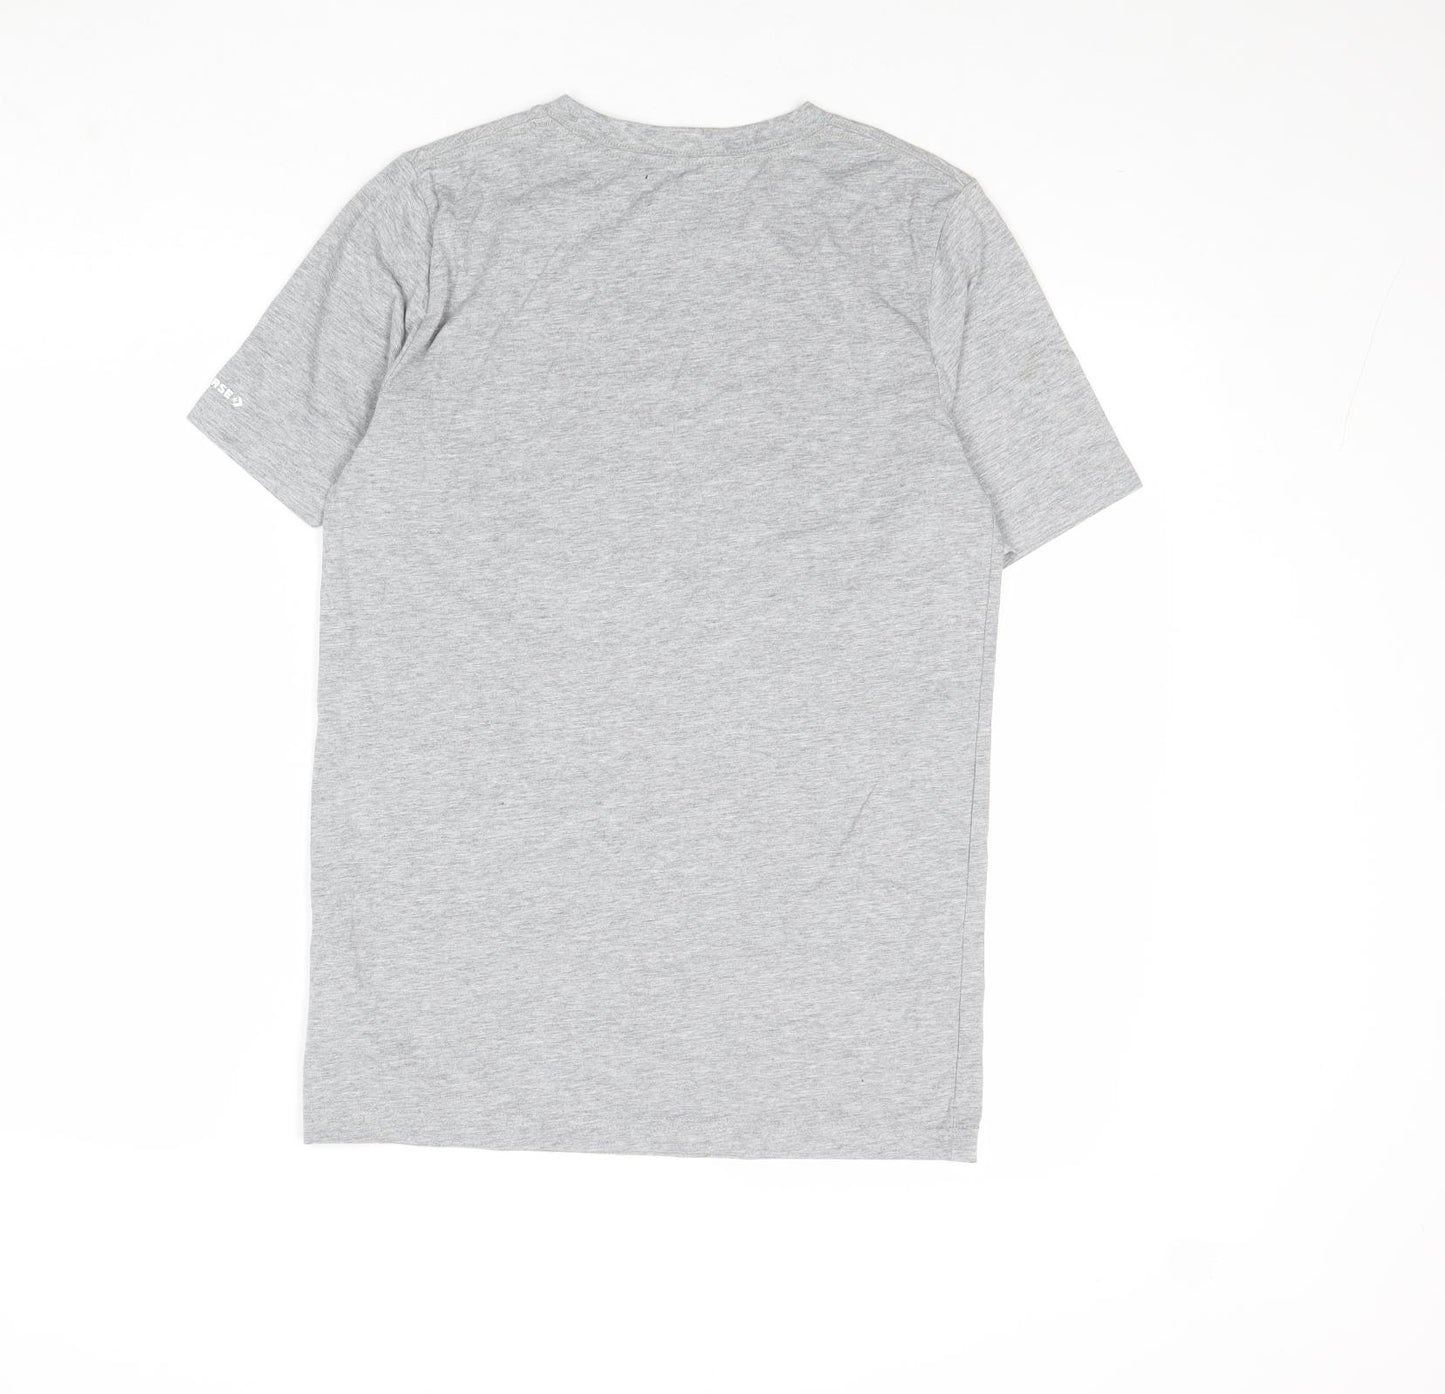 Converse Boys Grey Cotton Basic T-Shirt Size 13-14 Years Round Neck Pullover - Converse All Star